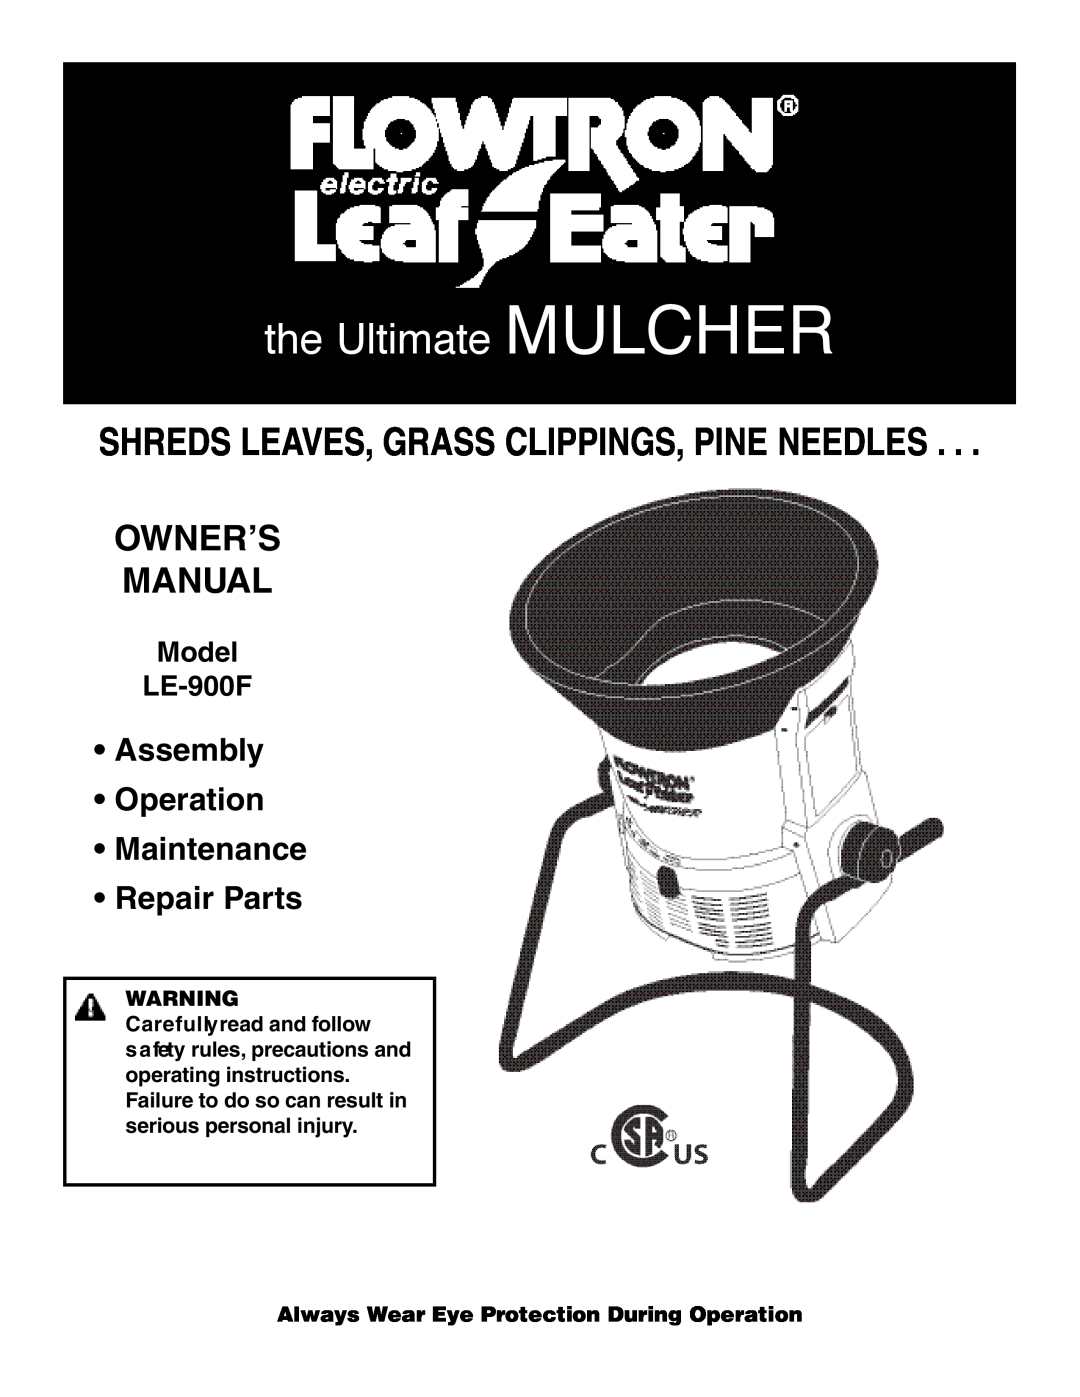 Flowtron Outdoor Products owner manual the Ultimate MULCHER, Owner’S Manual, Model LE-900F 